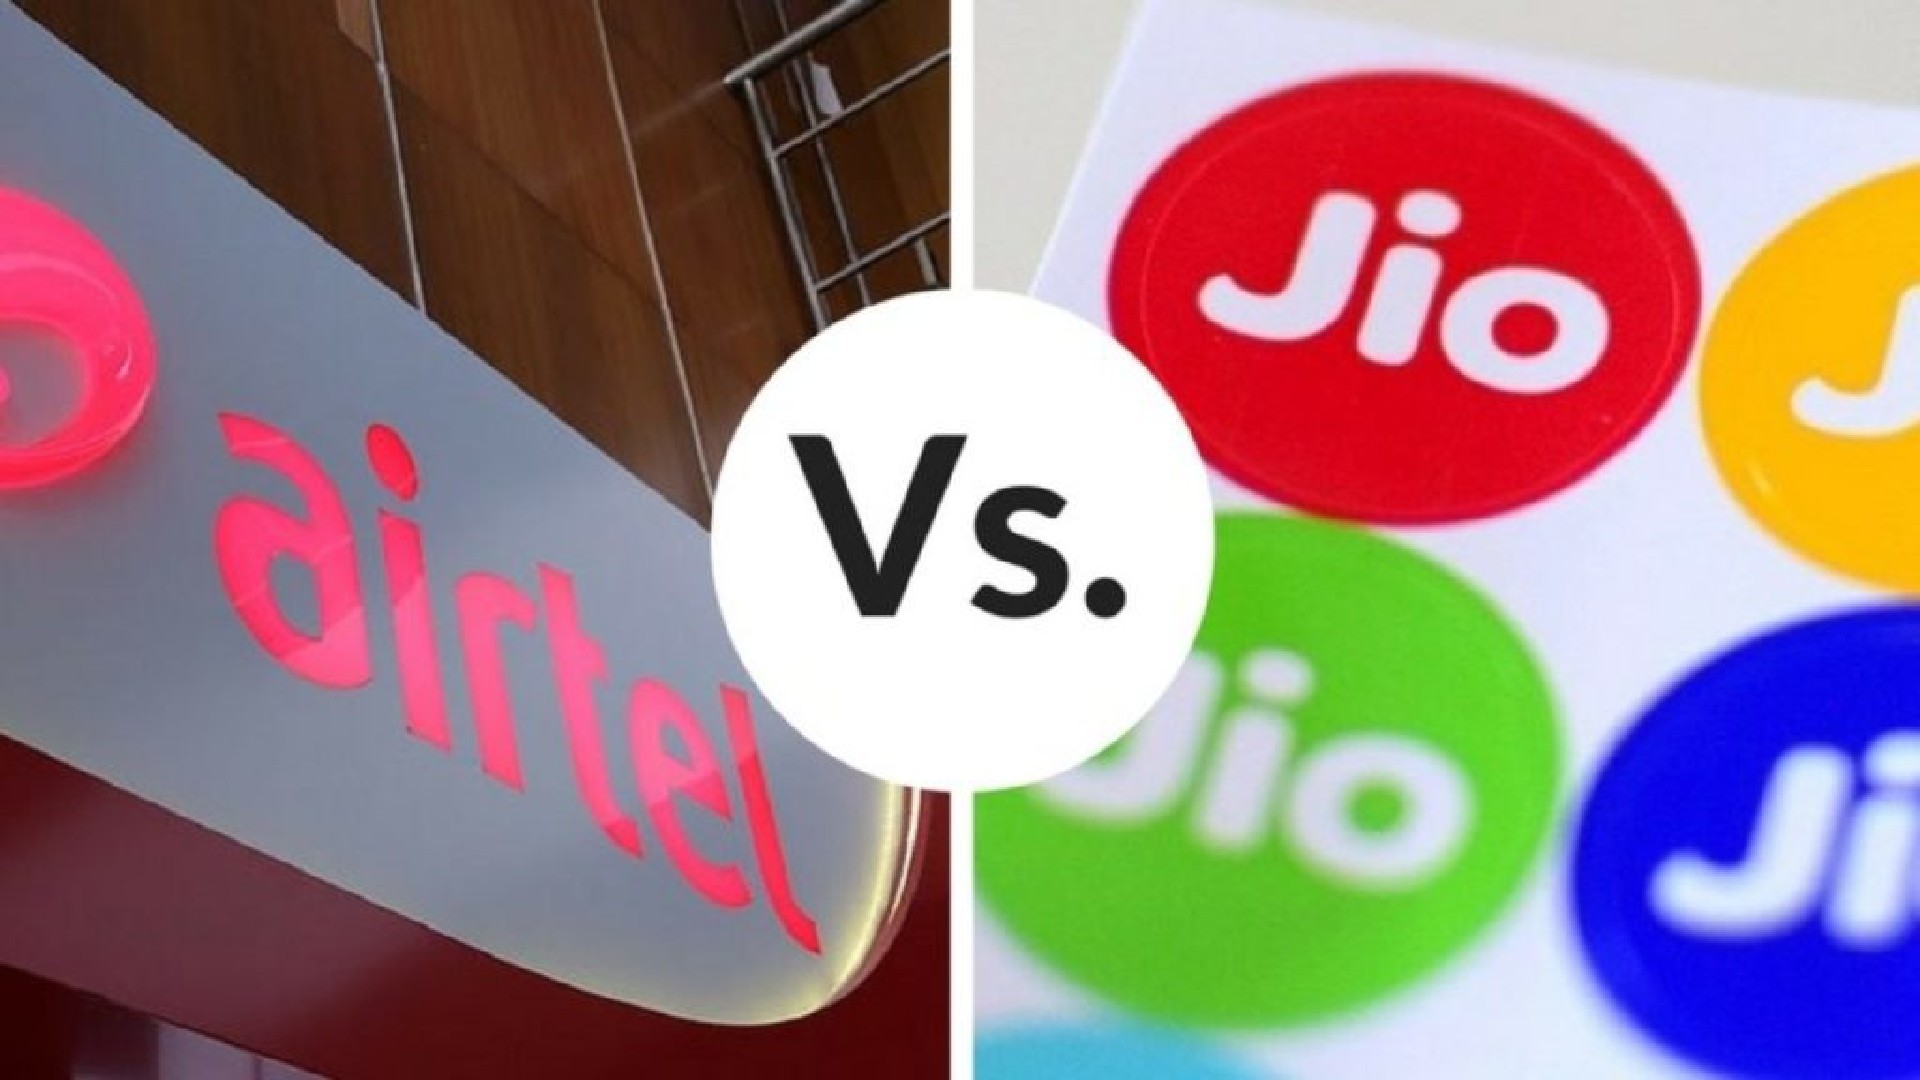 Airtel Finally Beats Jio To Become #1 Telco With Active Users